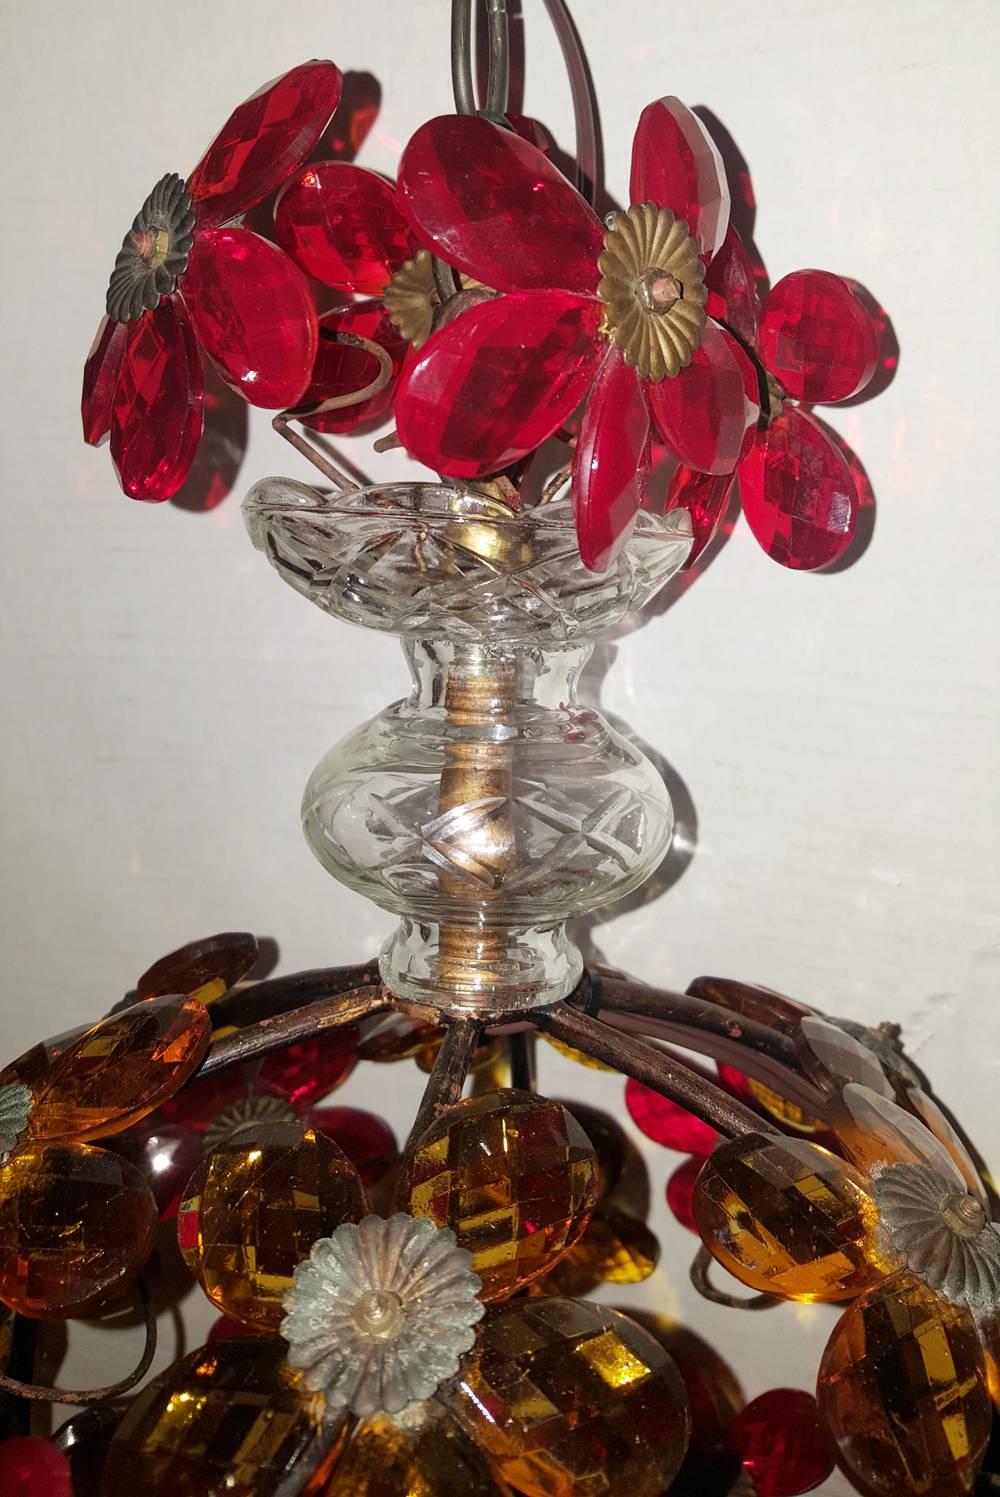 French, 1940s gilt metal light fixture with red and amber crystal flowers with three candelabra interior lights.

Measurements:
Diameter: 11